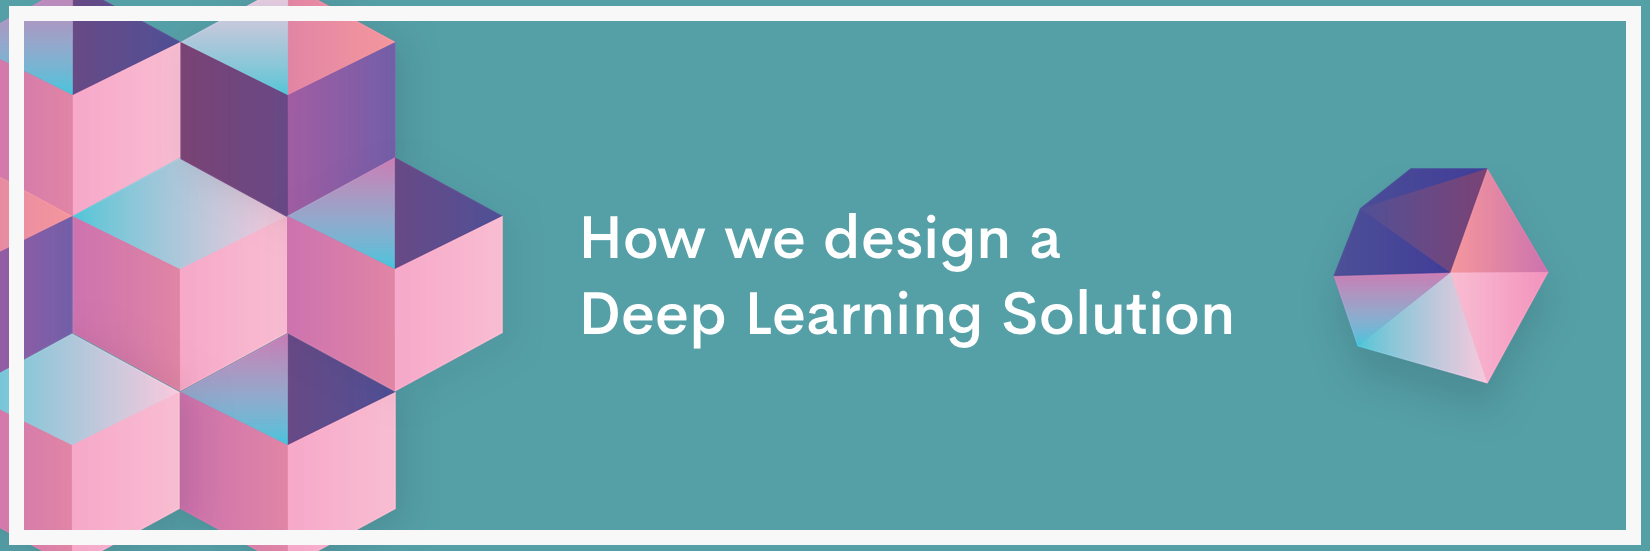 Deep Learning 101: How we design a Deep Learning Solution